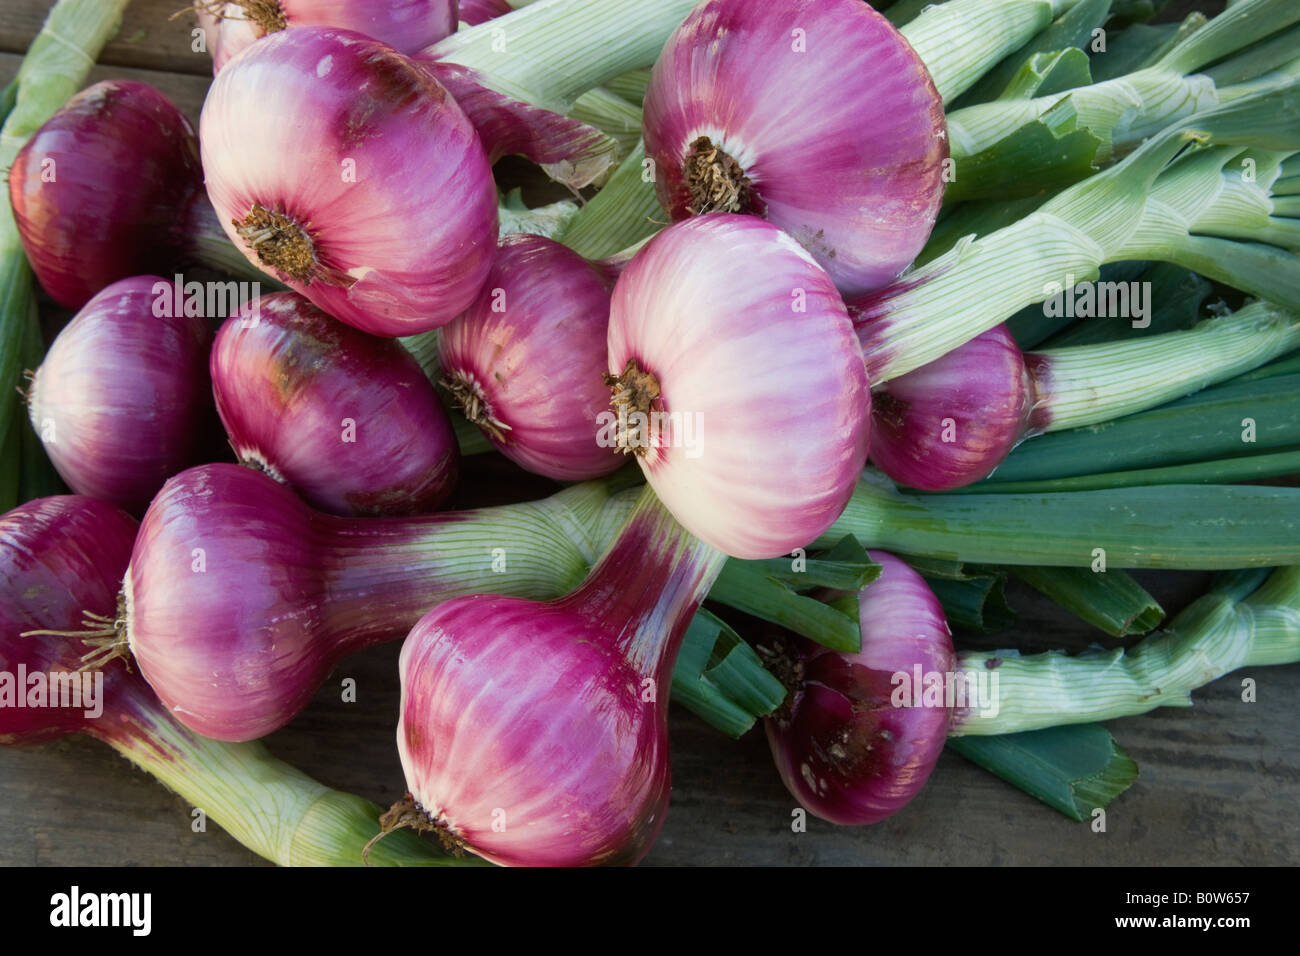 Red onions, bunch. Stock Photo